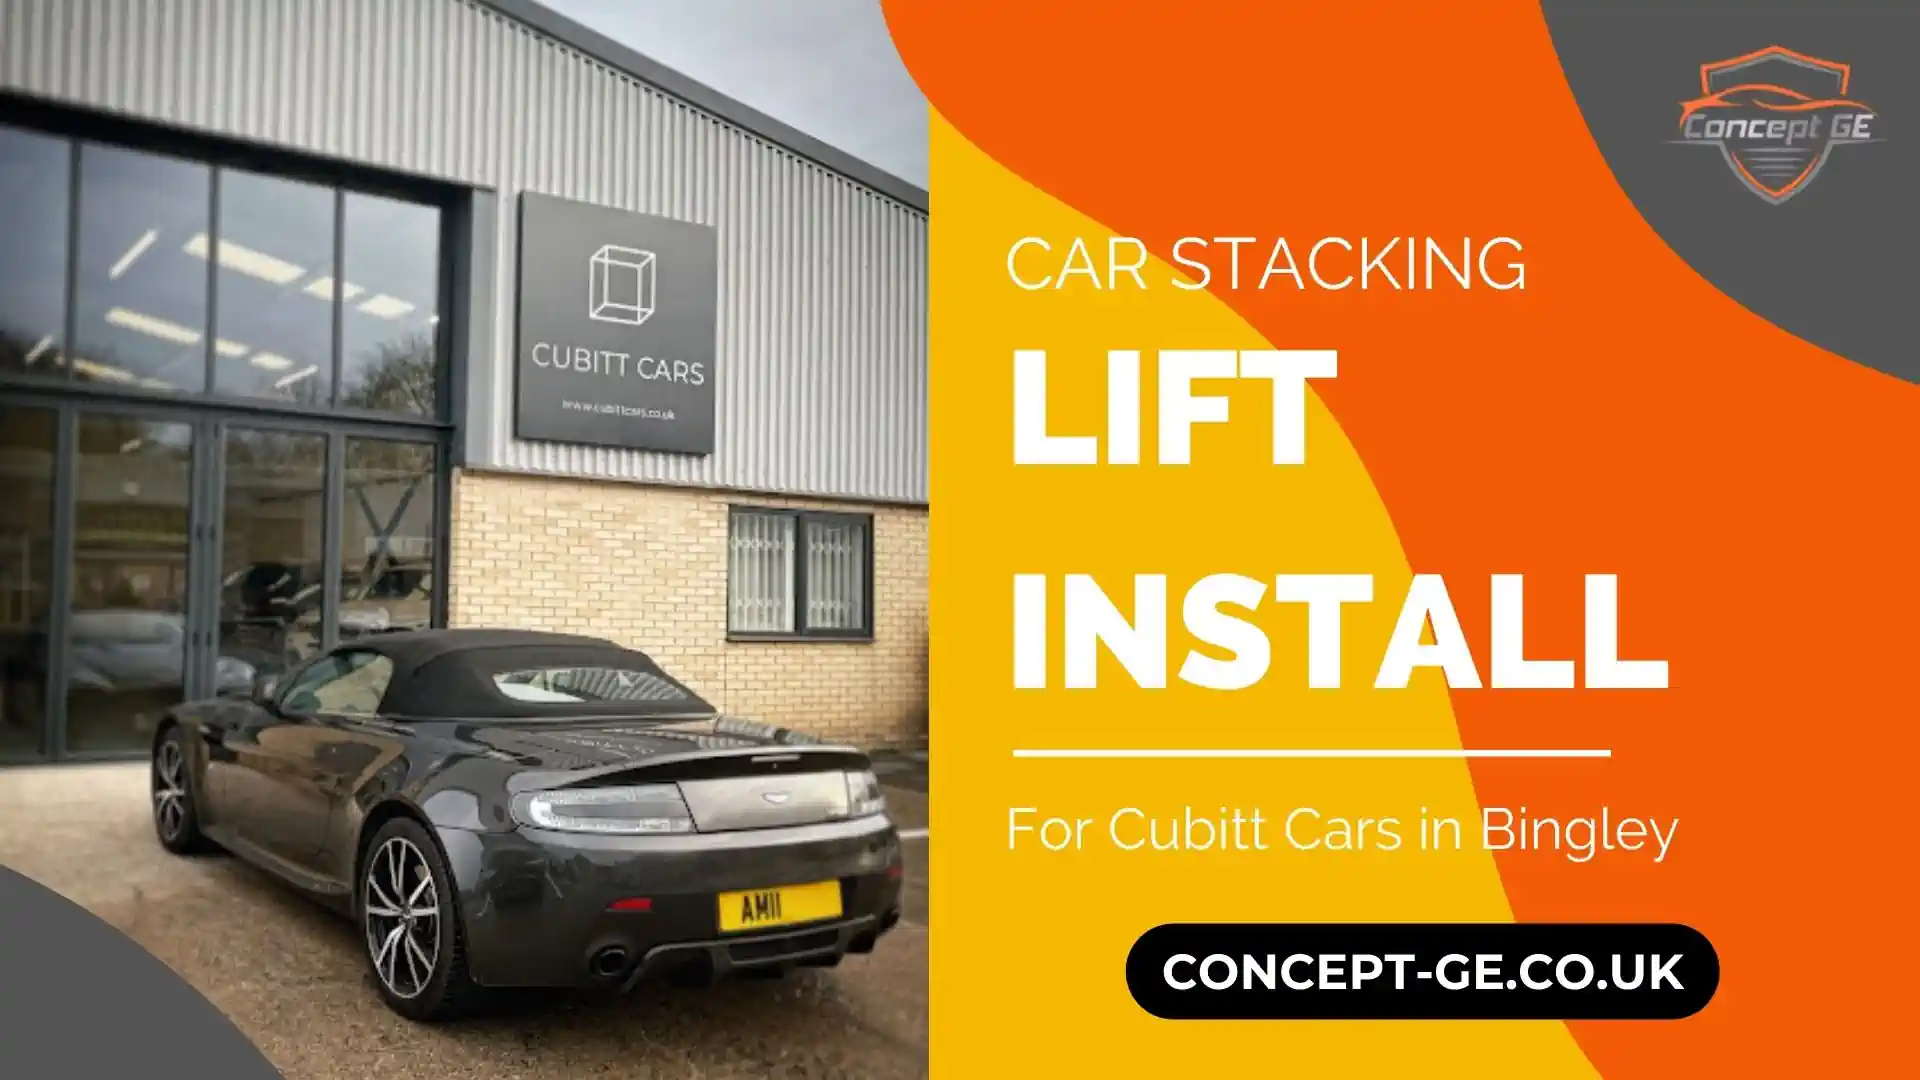 4 Post Lift Install for Car Stacking at Cubitt cars in Bingley